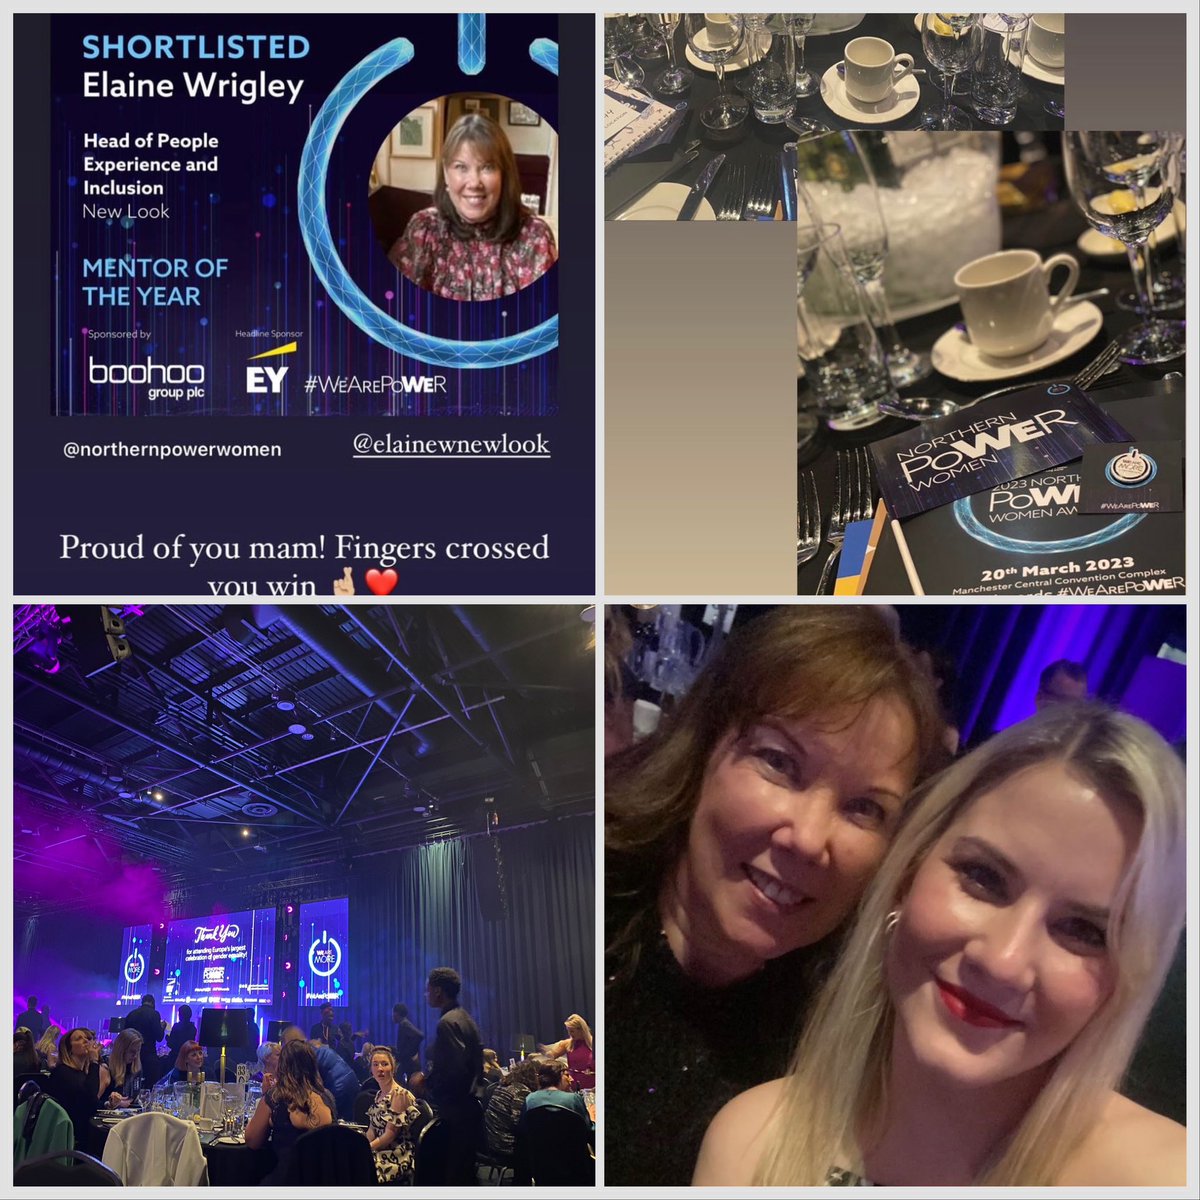 What an amazing night @NorthPowerWomen #NPWAwards, last night. A room so full of positive energy and focus on making a difference. Incredibly special to be able to share it with my daughter. #payitforward #WeArePower Congrats to the fantastic Heather Jackson and Lee Chambers.